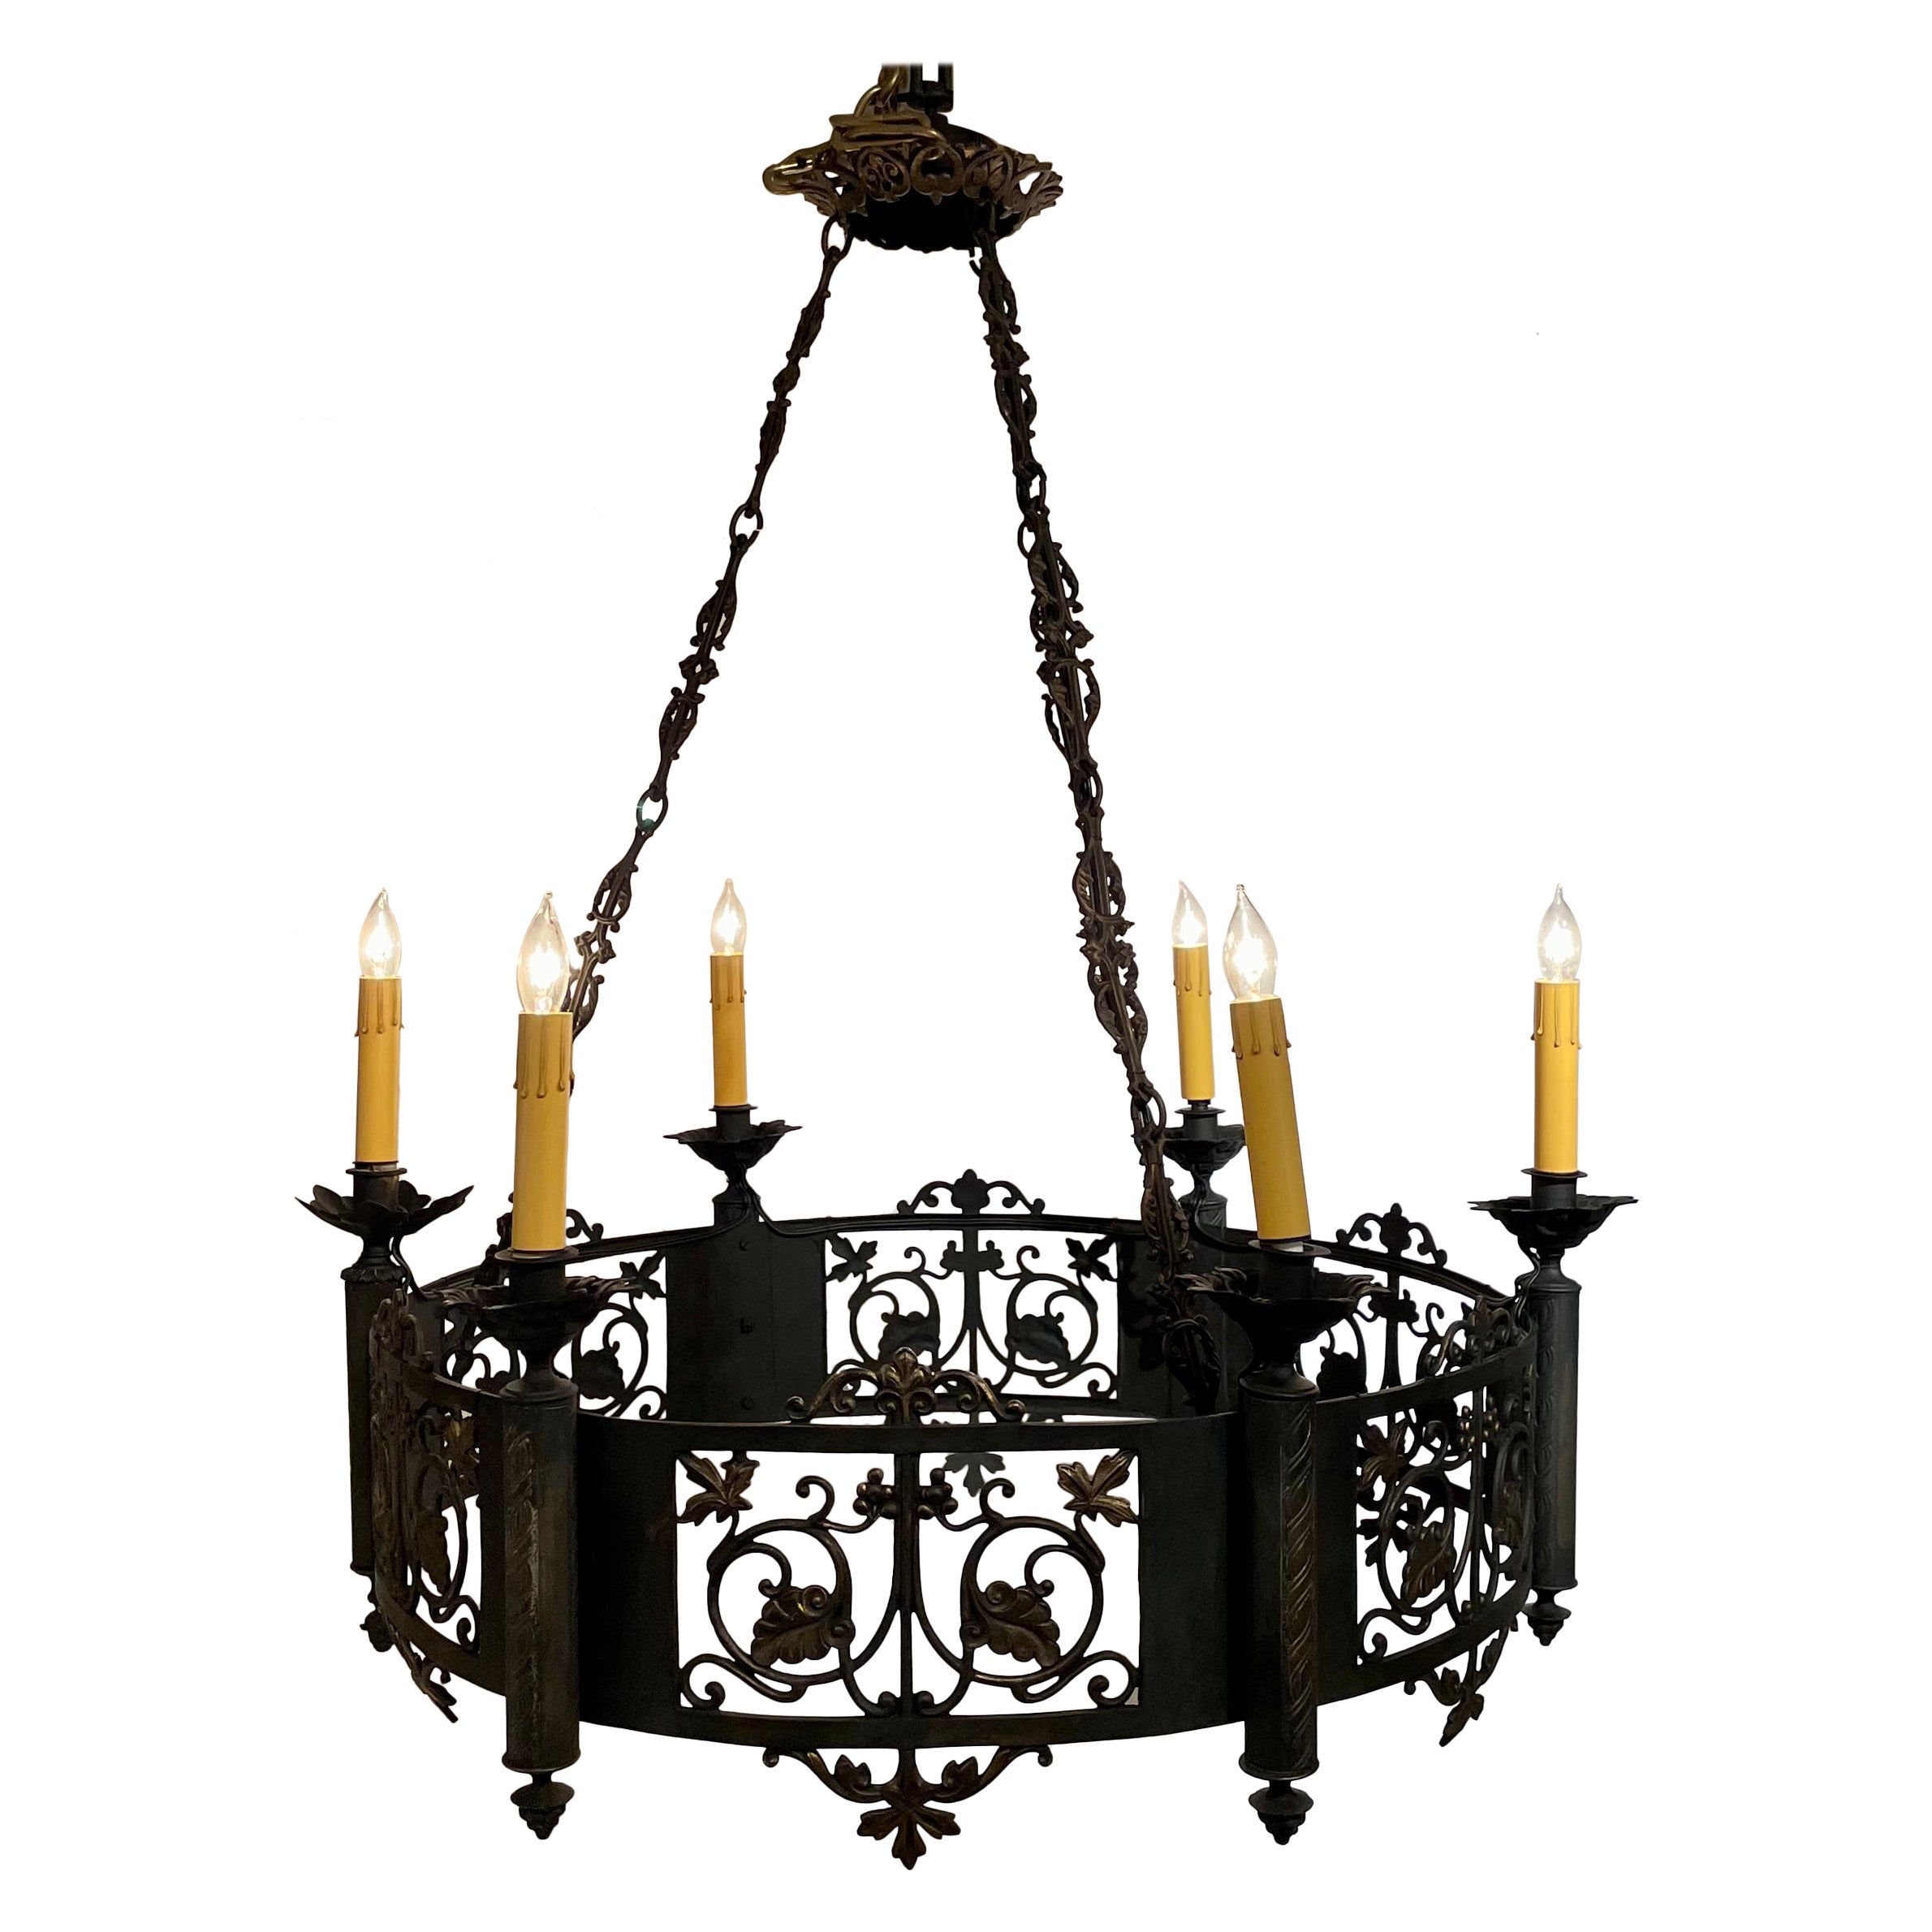 Antique French Patinated Bronze 6 Light Chandelier, Circa 1885.